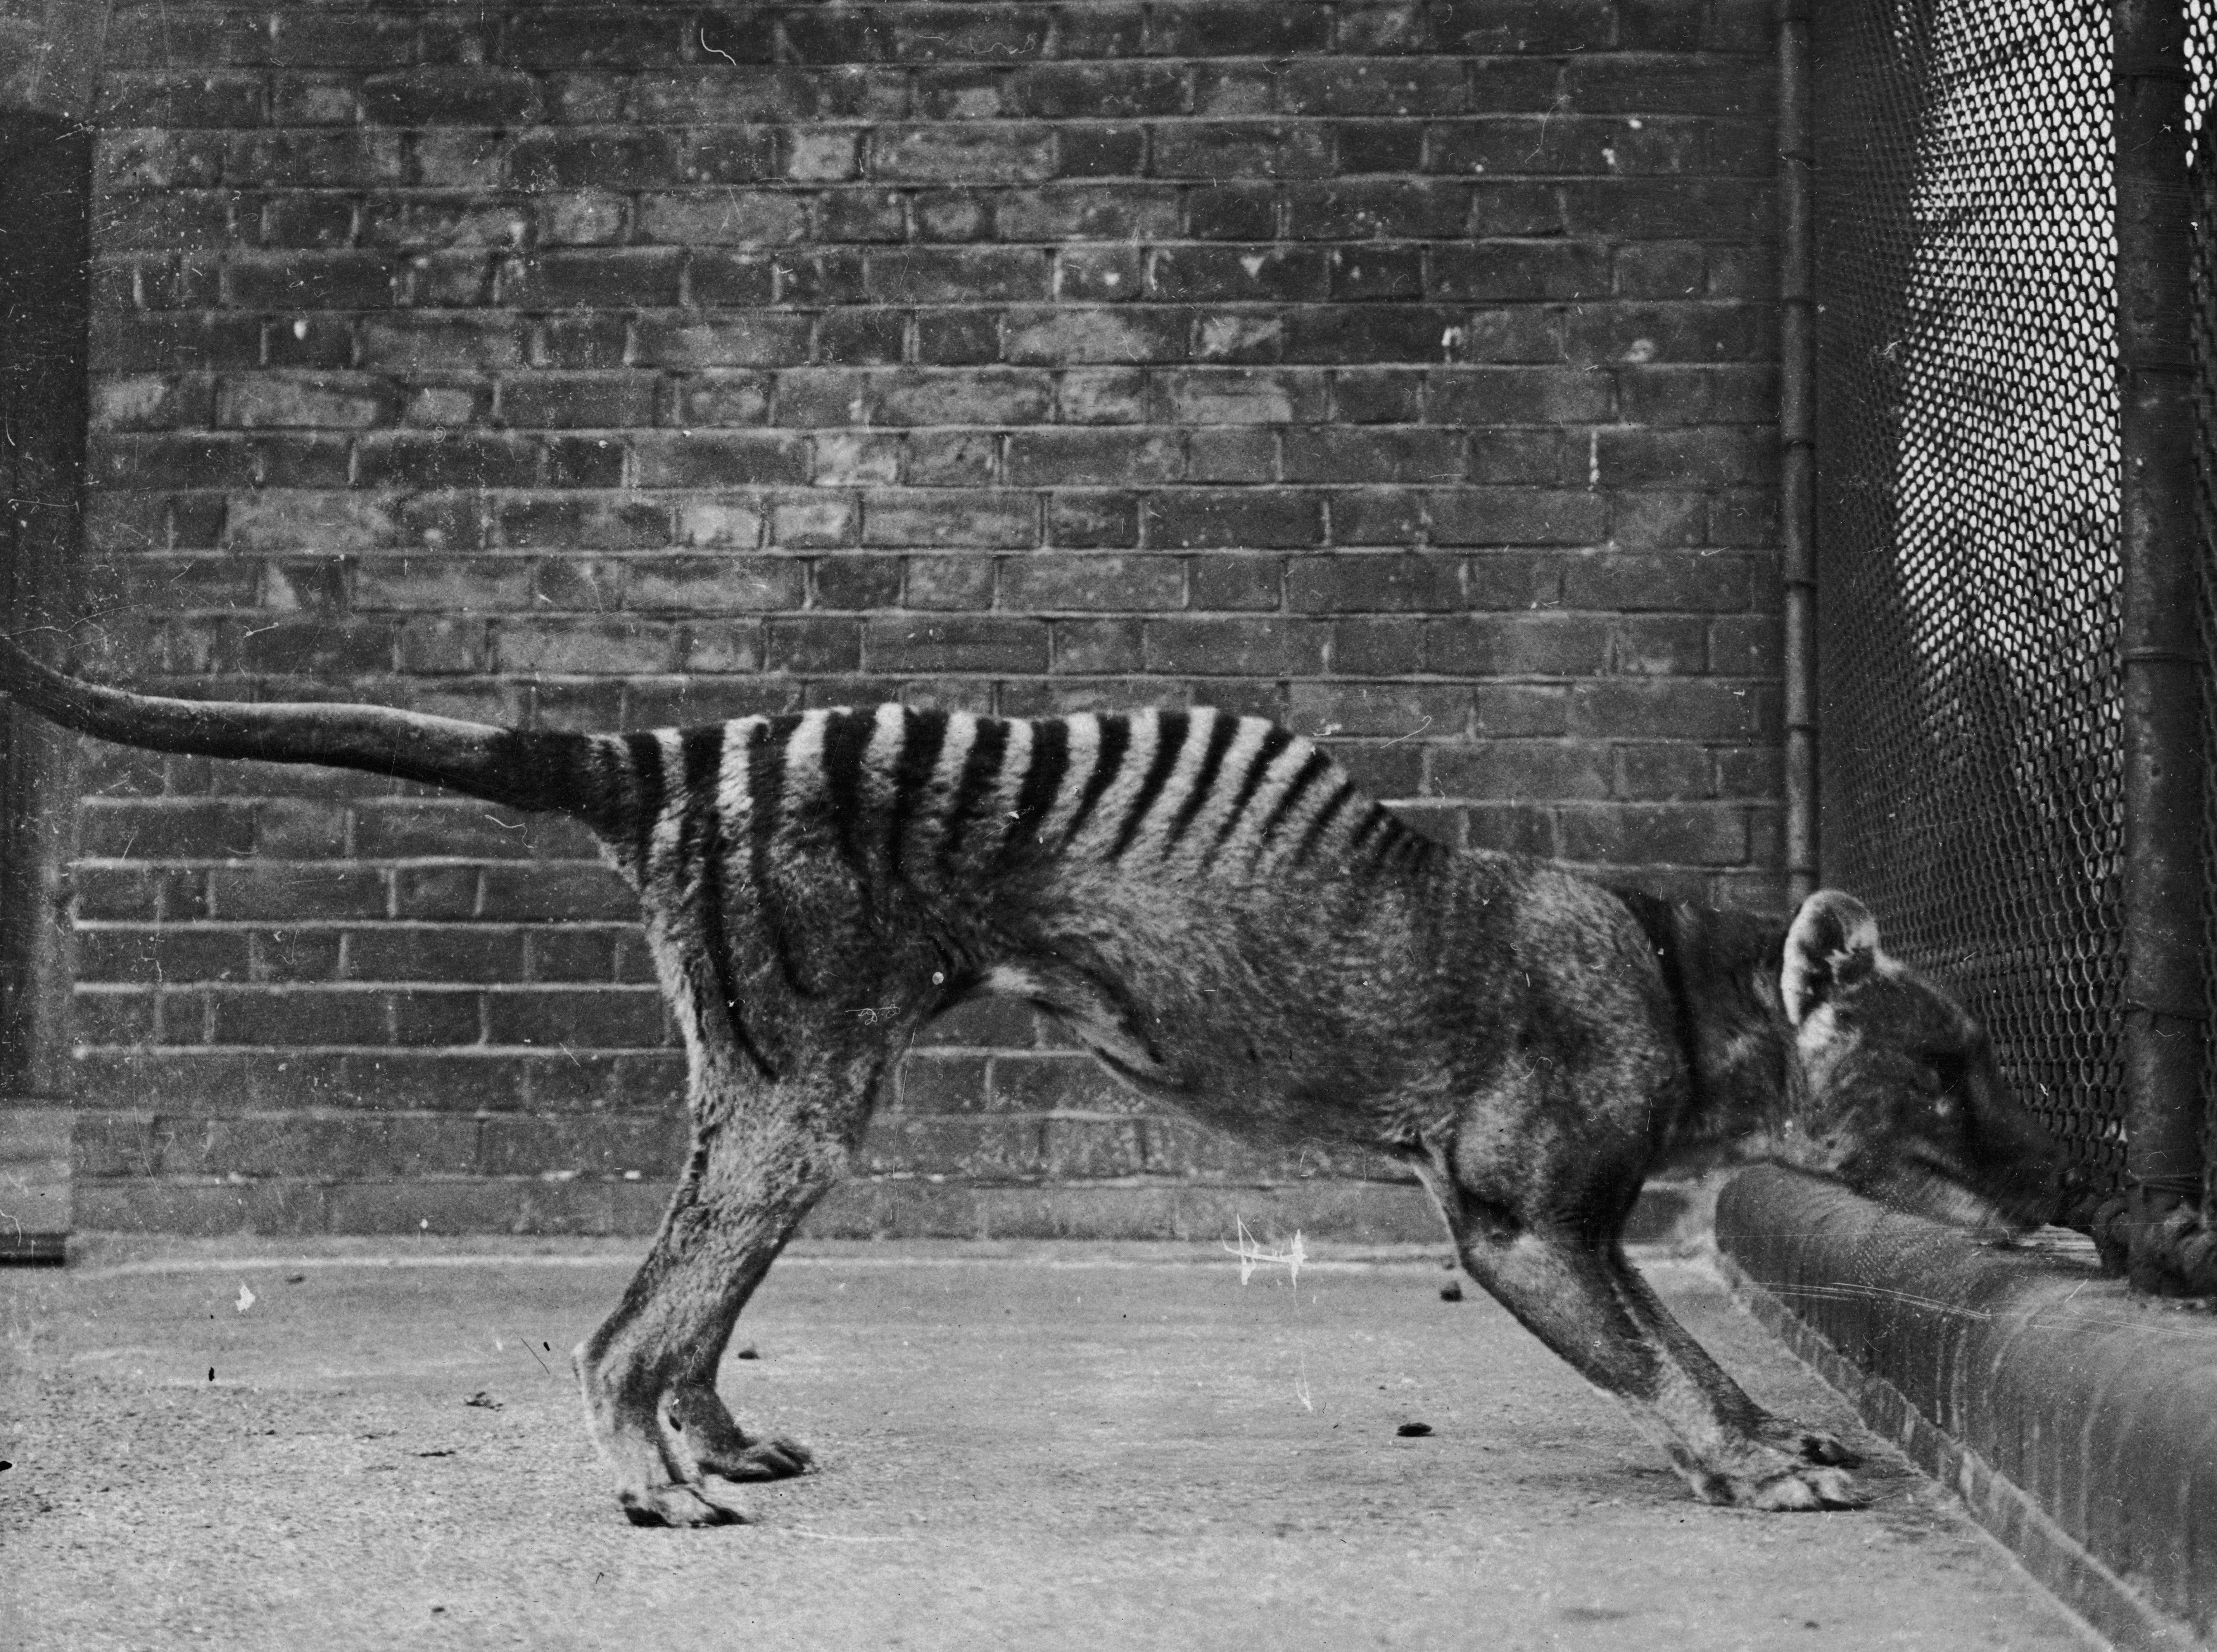 The thylacine, a marsupial predator driven to extinction by humans. (Photo: Topical Press Agency/Hulton Archive, Getty Images)